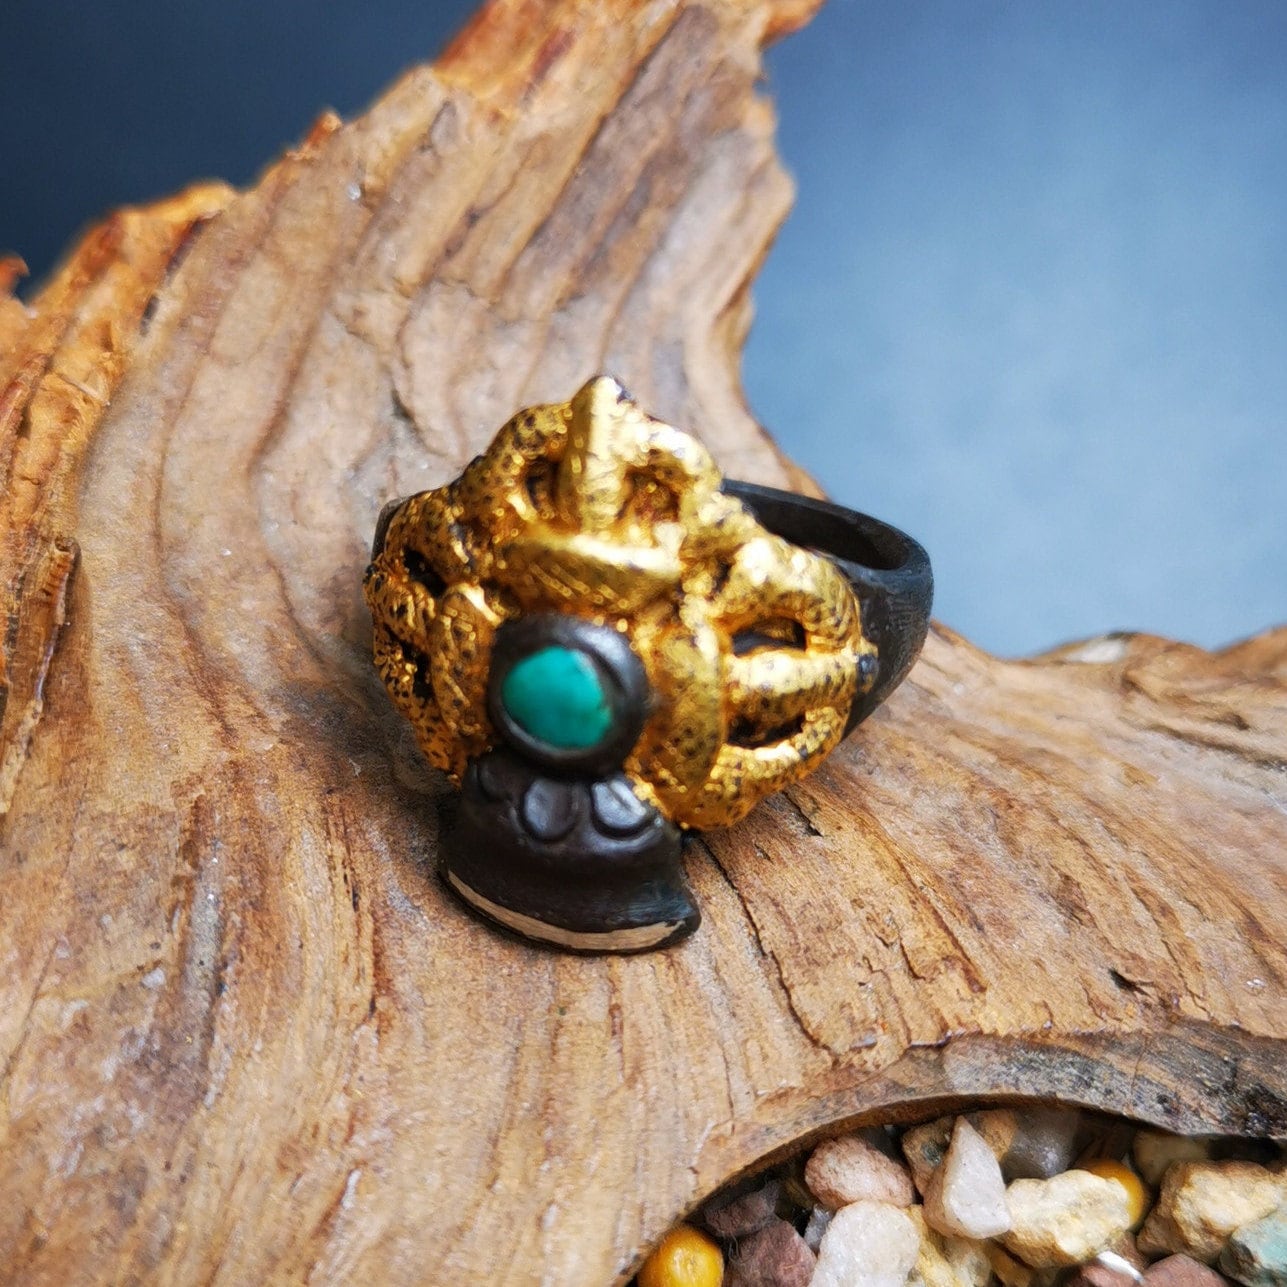 Gandhanra Unique Handcrafted Ring, Tibetan Buddhist Vajra Bell Ring,Made of Pure Gold Filled and Silver Filled,Protection Jewelry